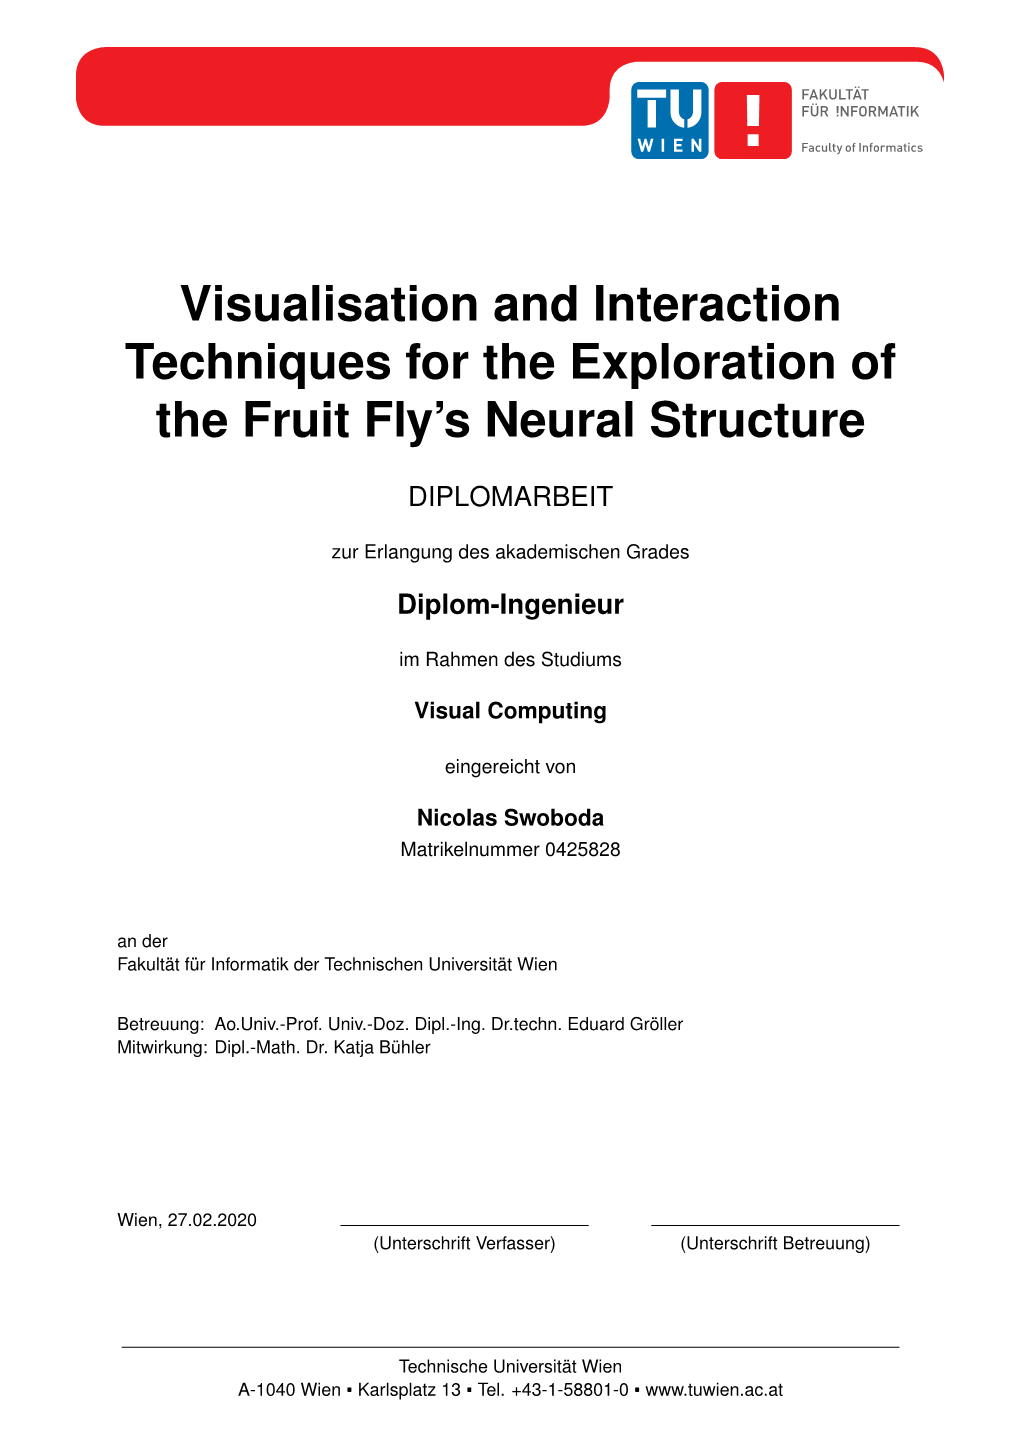 Visualisation and Interaction Techniques for the Exploration of the Fruit Fly’S Neural Structure